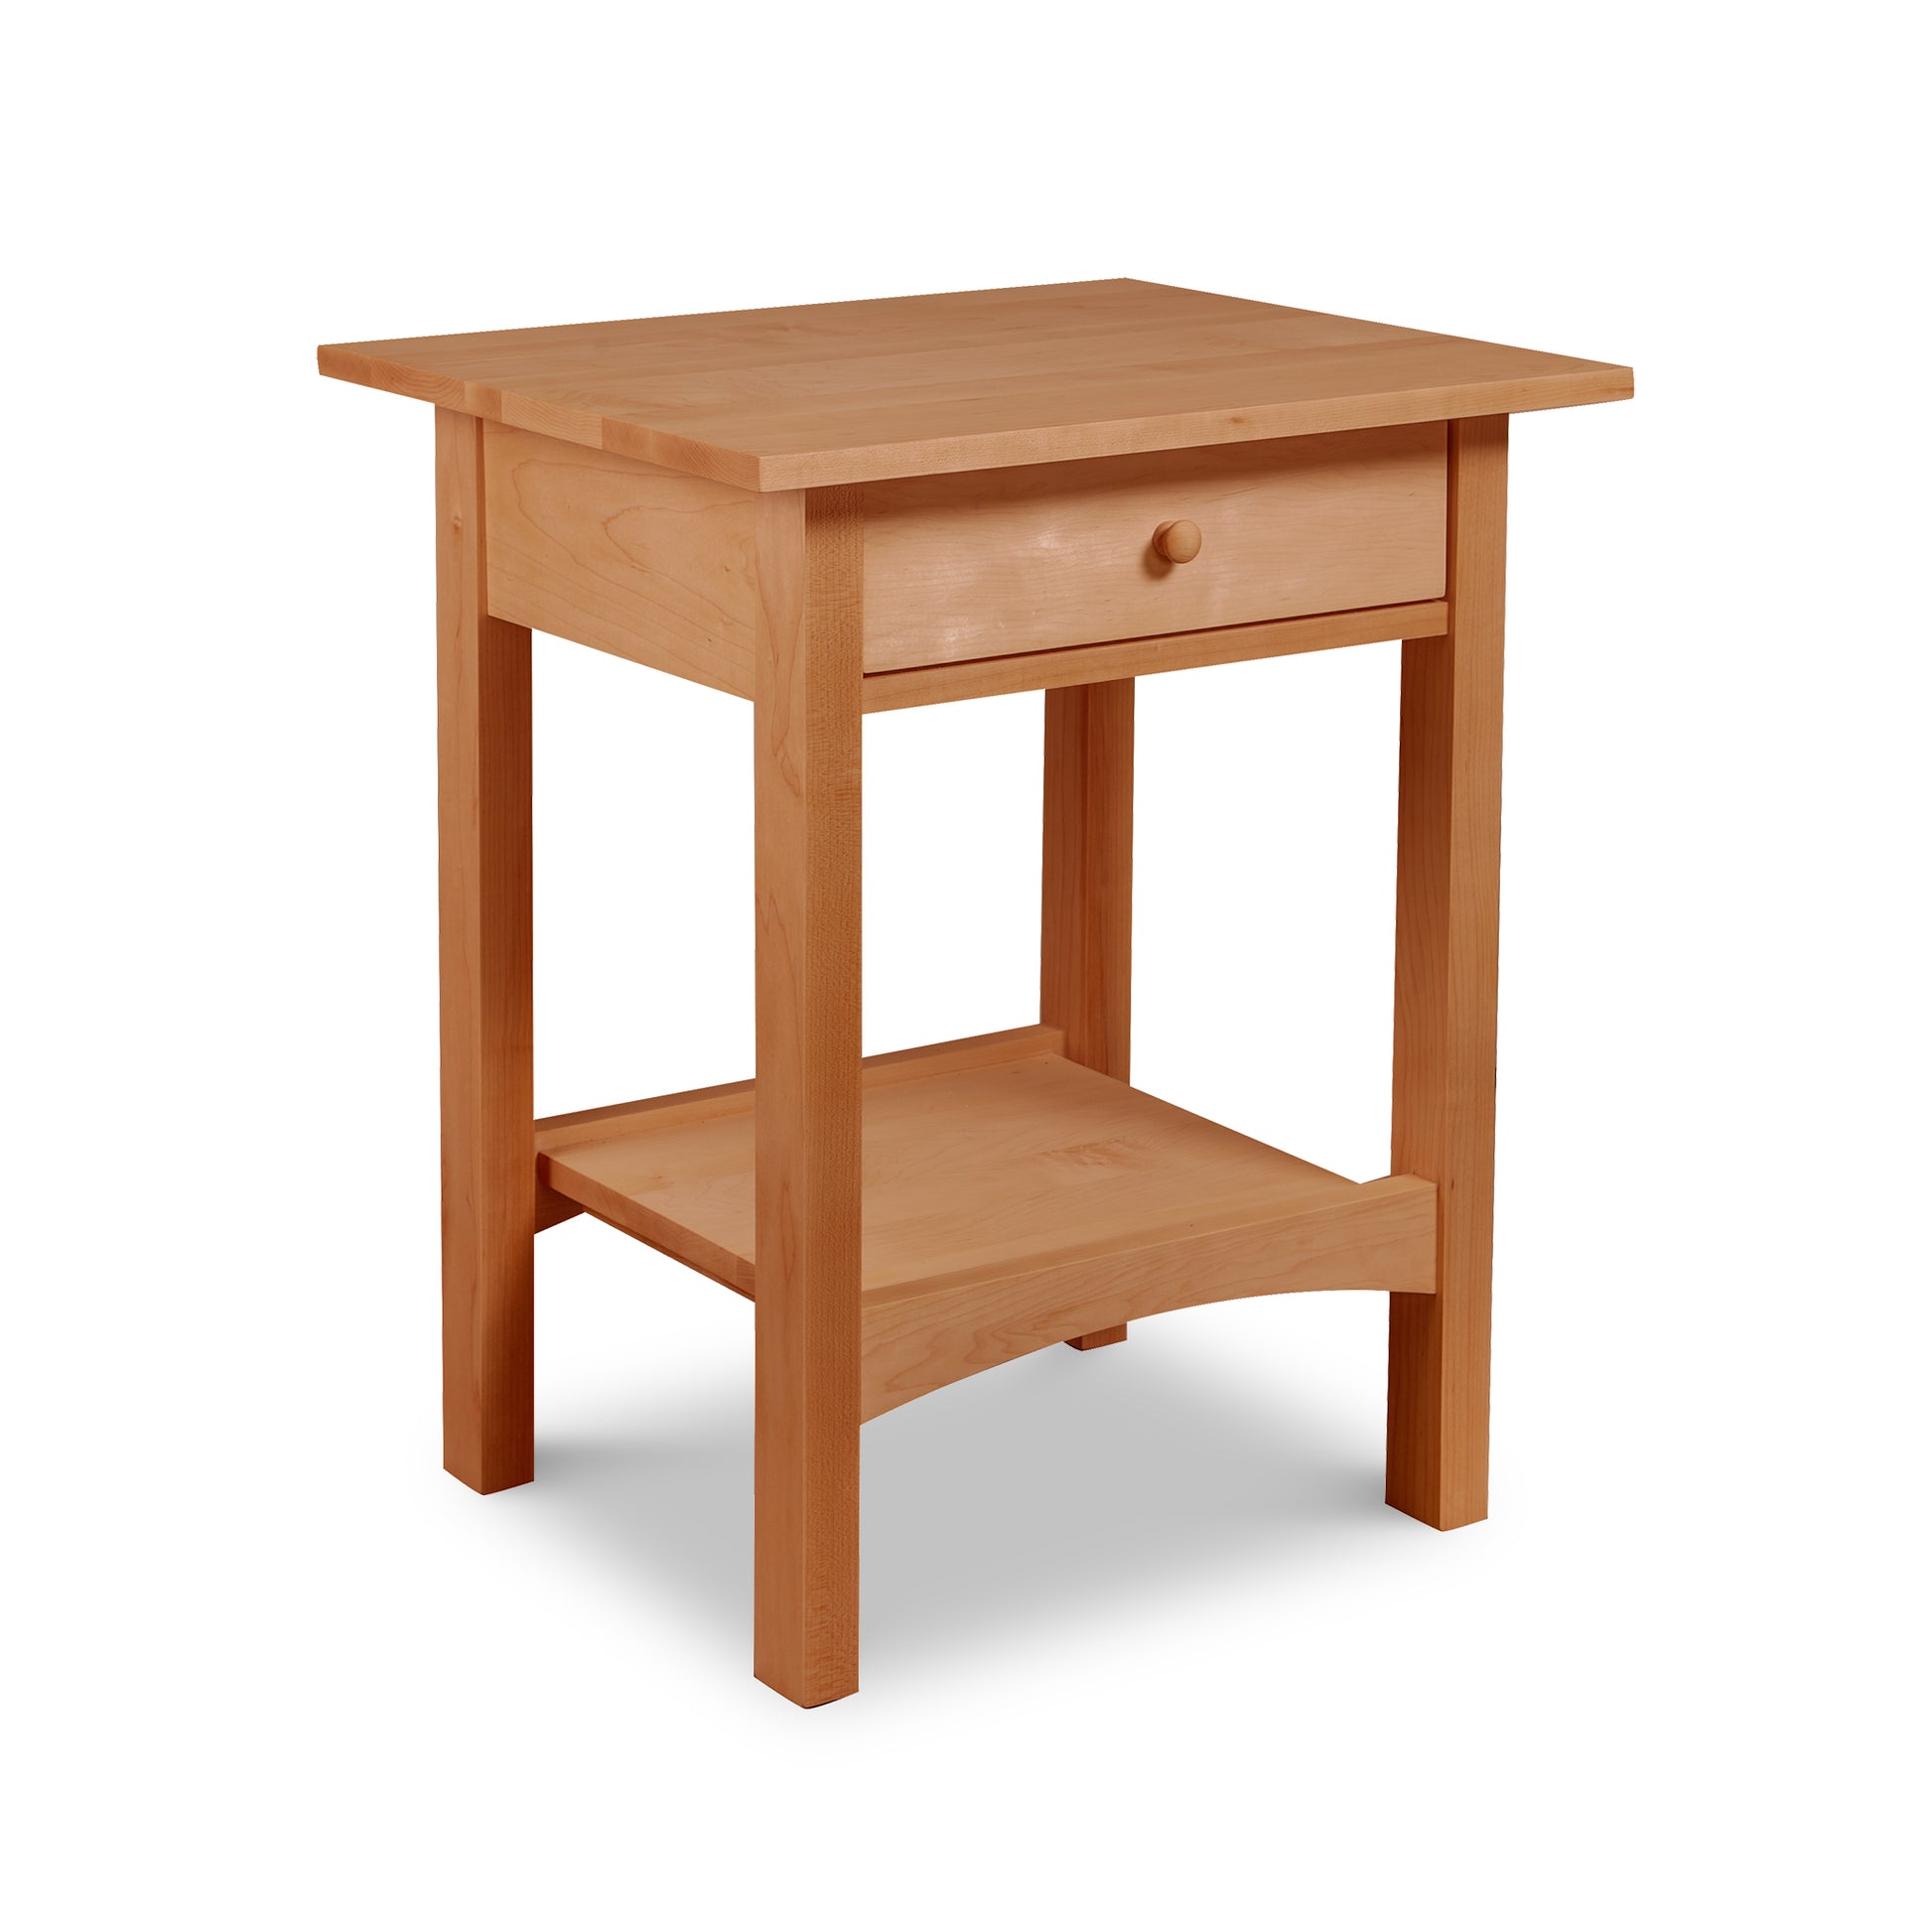 A small Vermont Furniture Designs Burlington Shaker 1-Drawer Open Shelf Nightstand with a drawer.